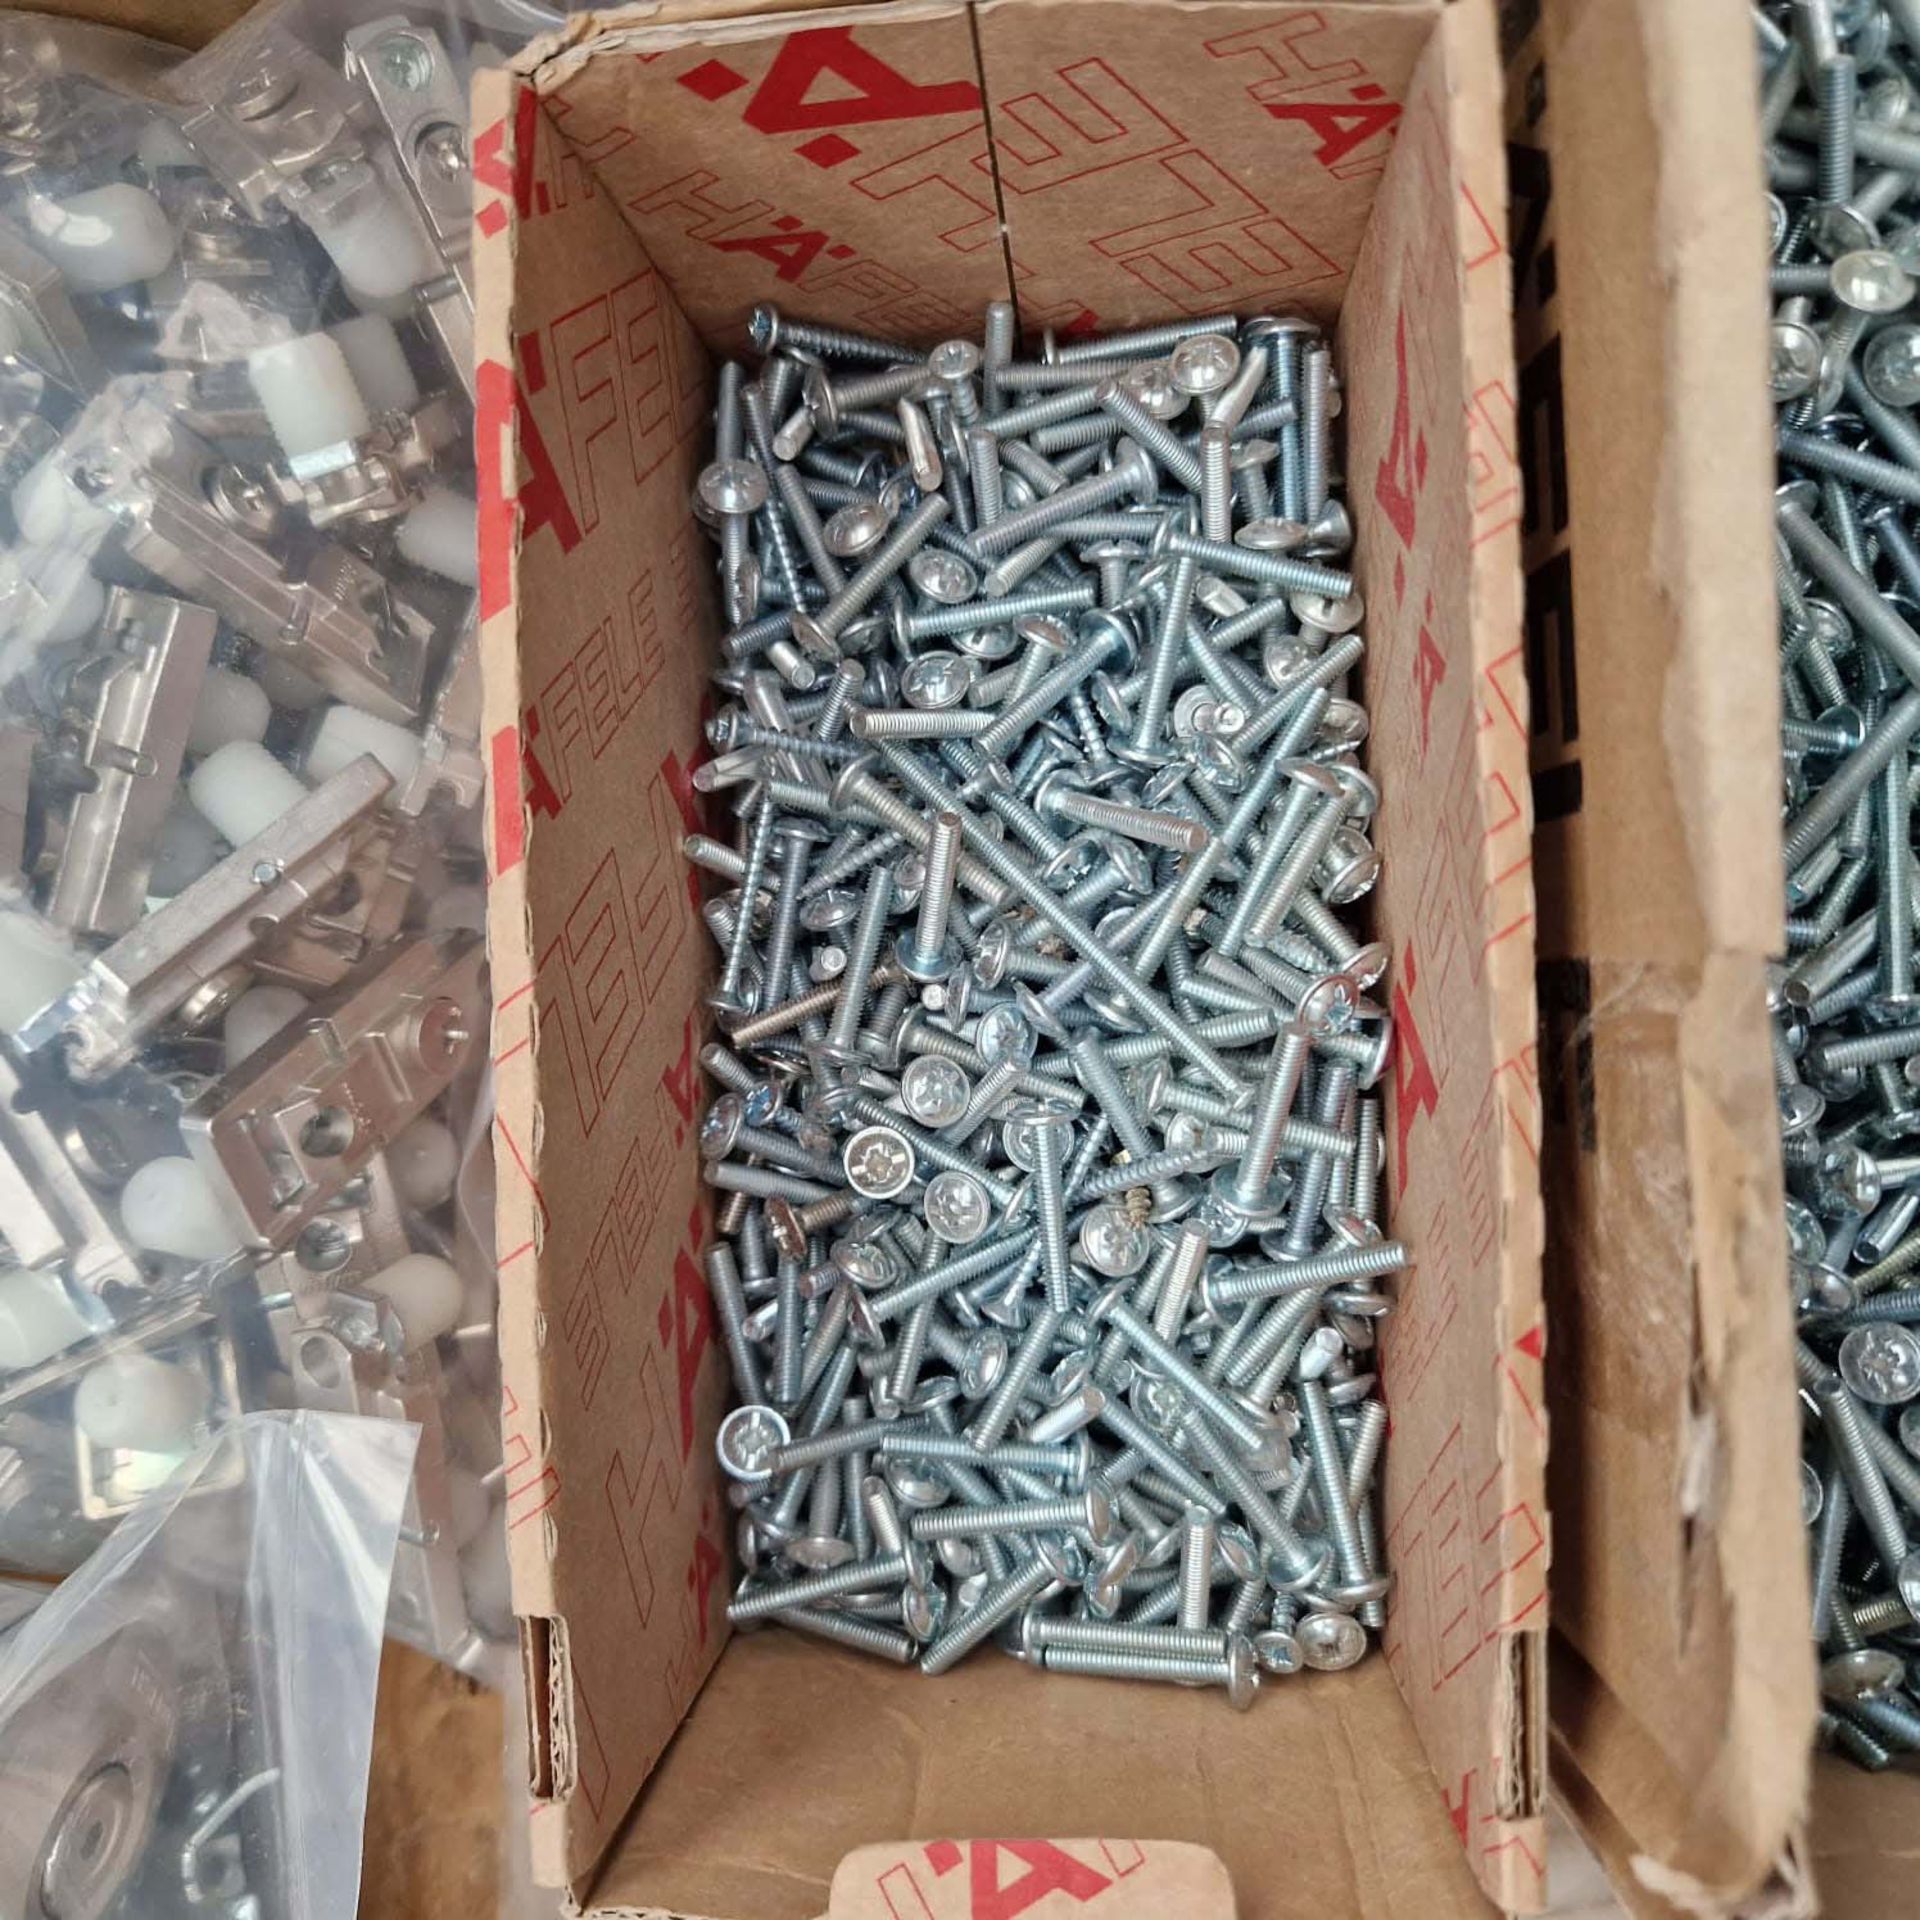 Quantity of Various Screws, Dowels & Hinges Etc. For Woodworking. - Image 19 of 24